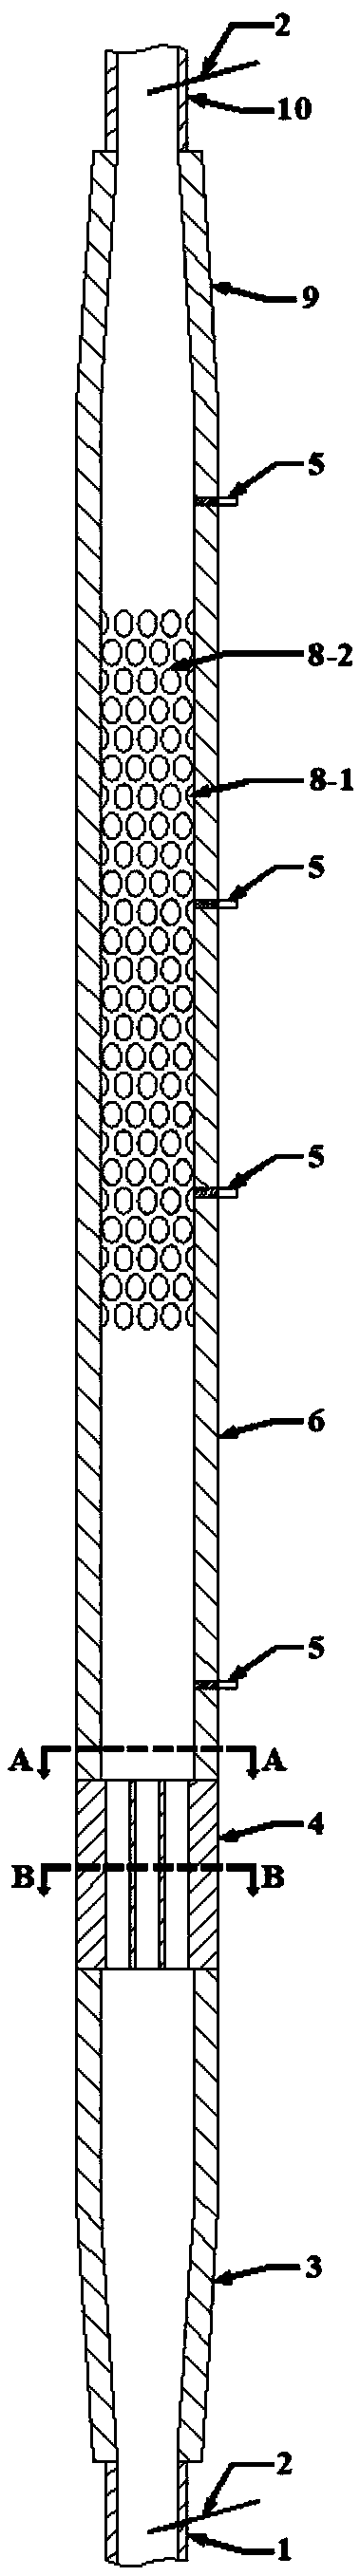 A steam generator inclined tube bundle heat exchange experimental device and method